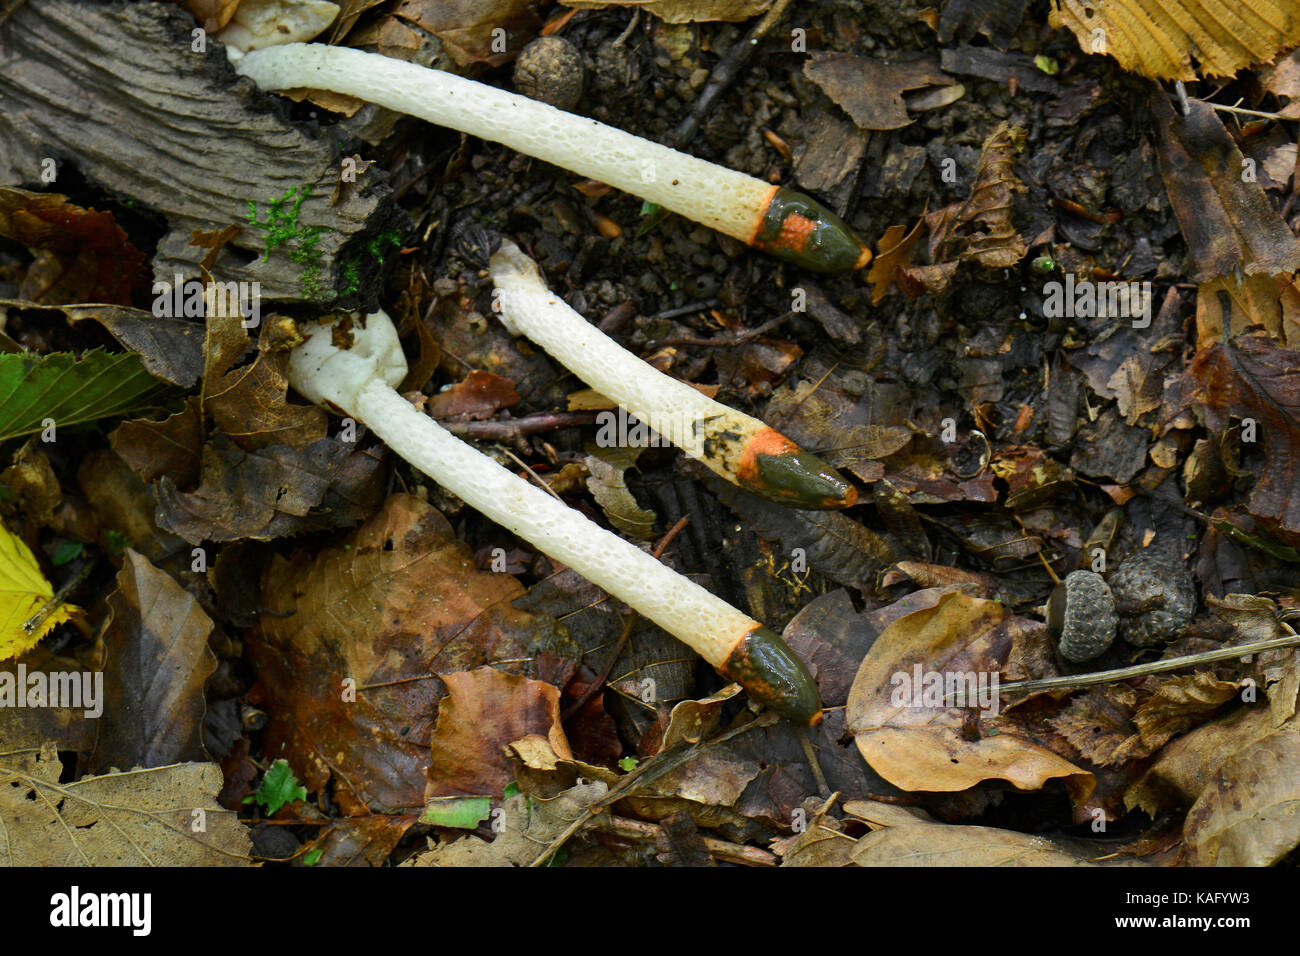 Dog Stinkhorn (Mutinus caninus), fallen fruiting bodies on the forest floor Stock Photo